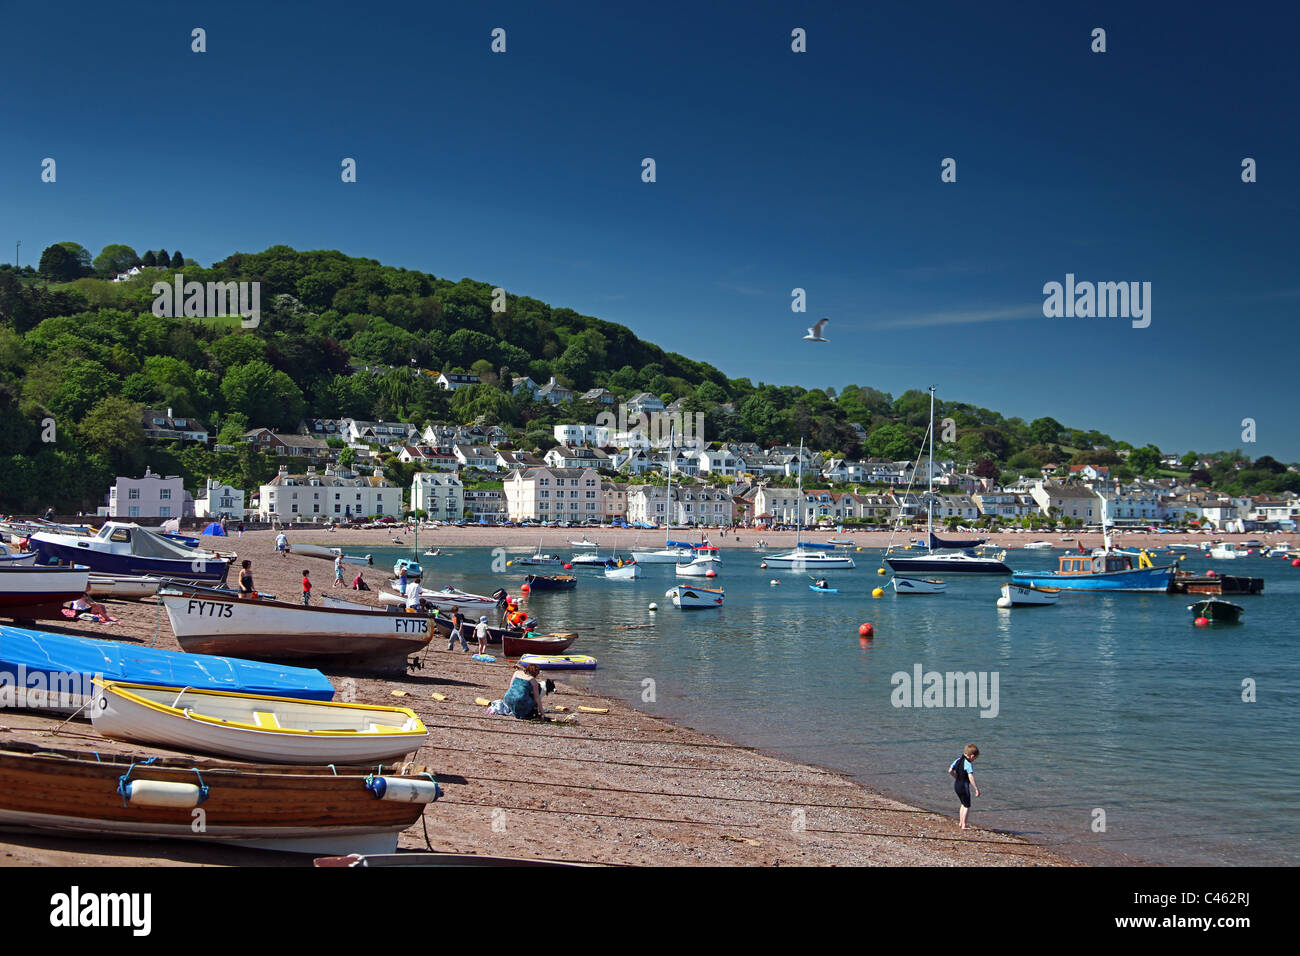 The view from Teignmouth across the estuary of the River Teign towards Shaldon on the opposite bank, Devon, England, UK Stock Photo